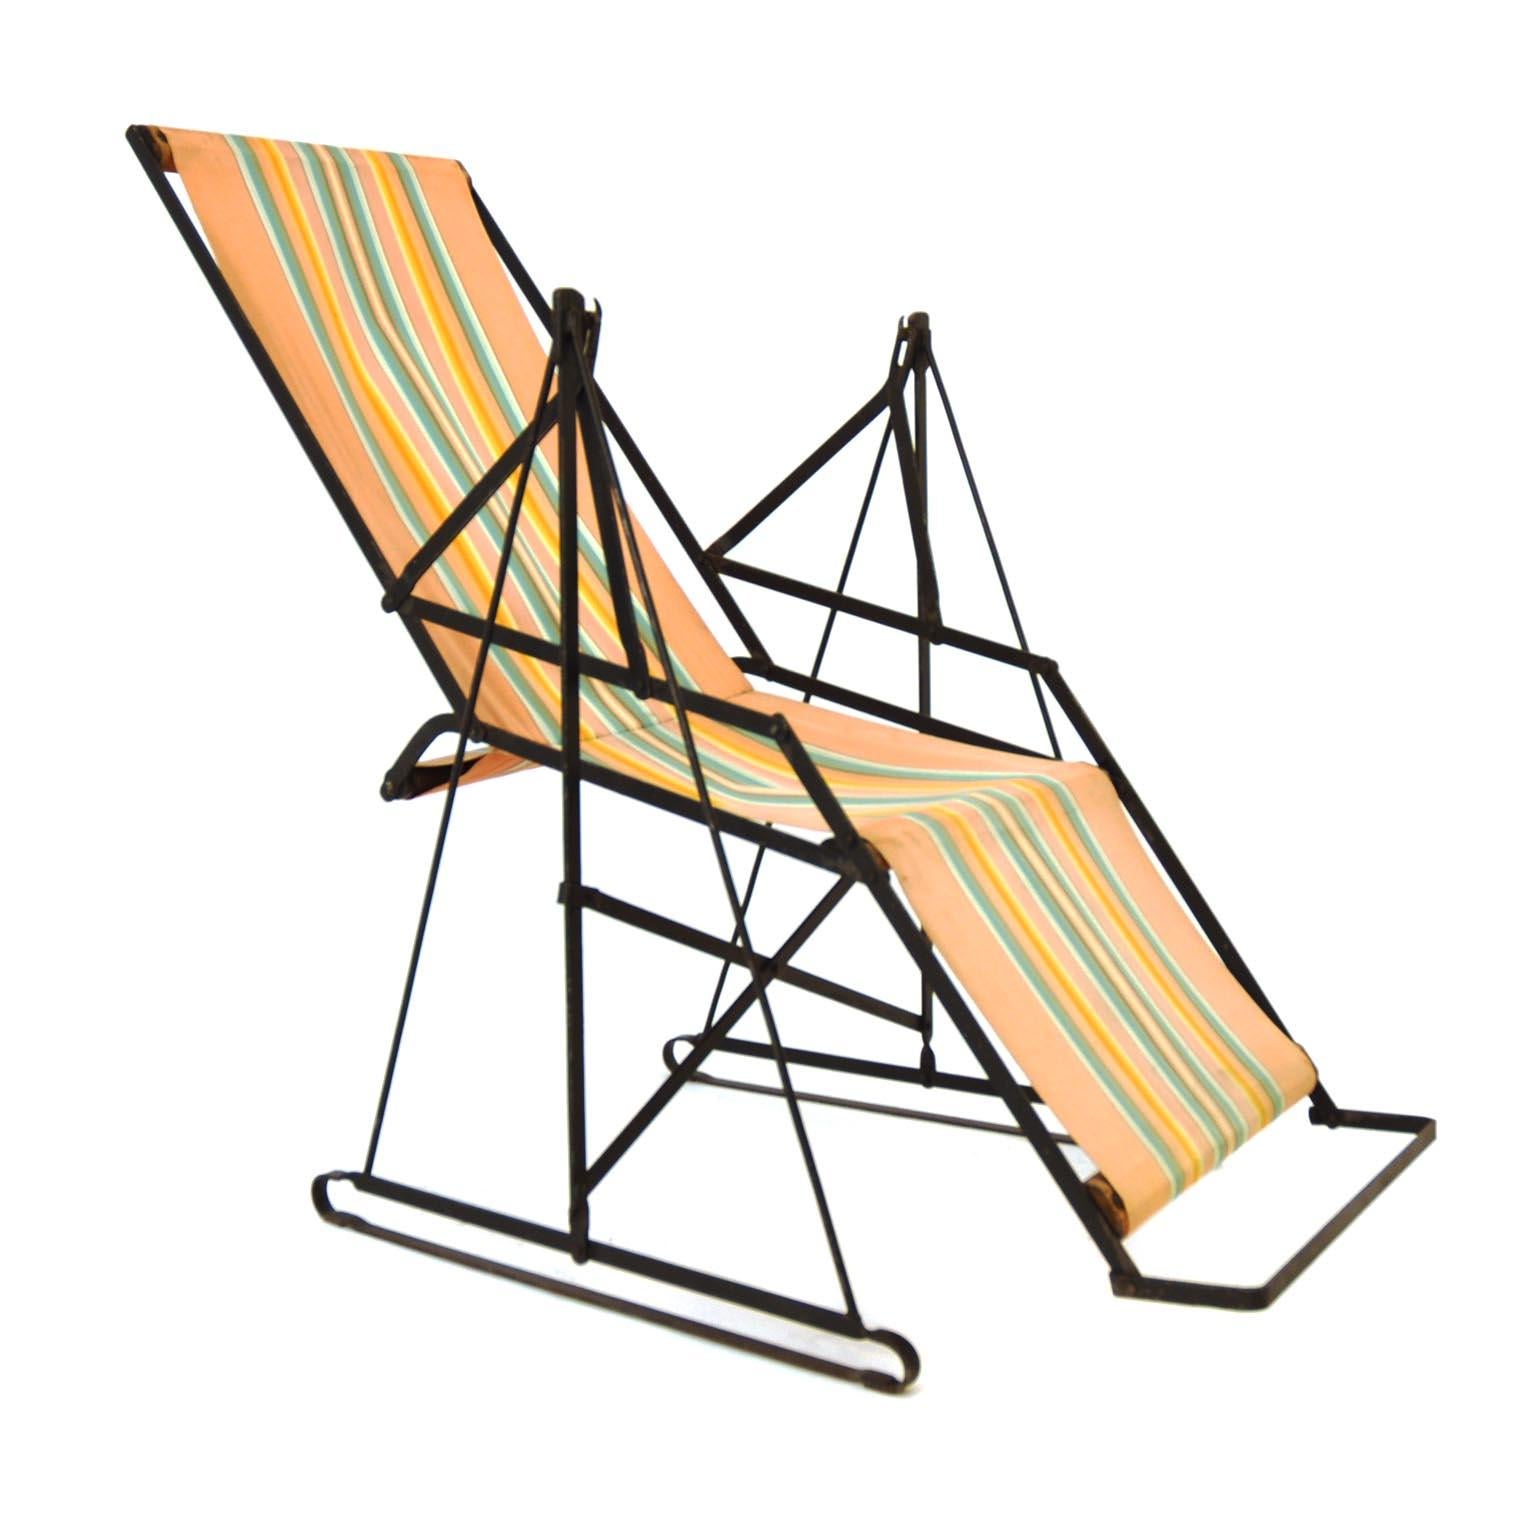 An amazing piece for your chair collection:
This sun chair was made in 1930 by Metz & Co. in Holland. The metal base is in the original condition, but we think the fabric is renewed in the 1950s.
It is really amazing how comfortable this piece is.